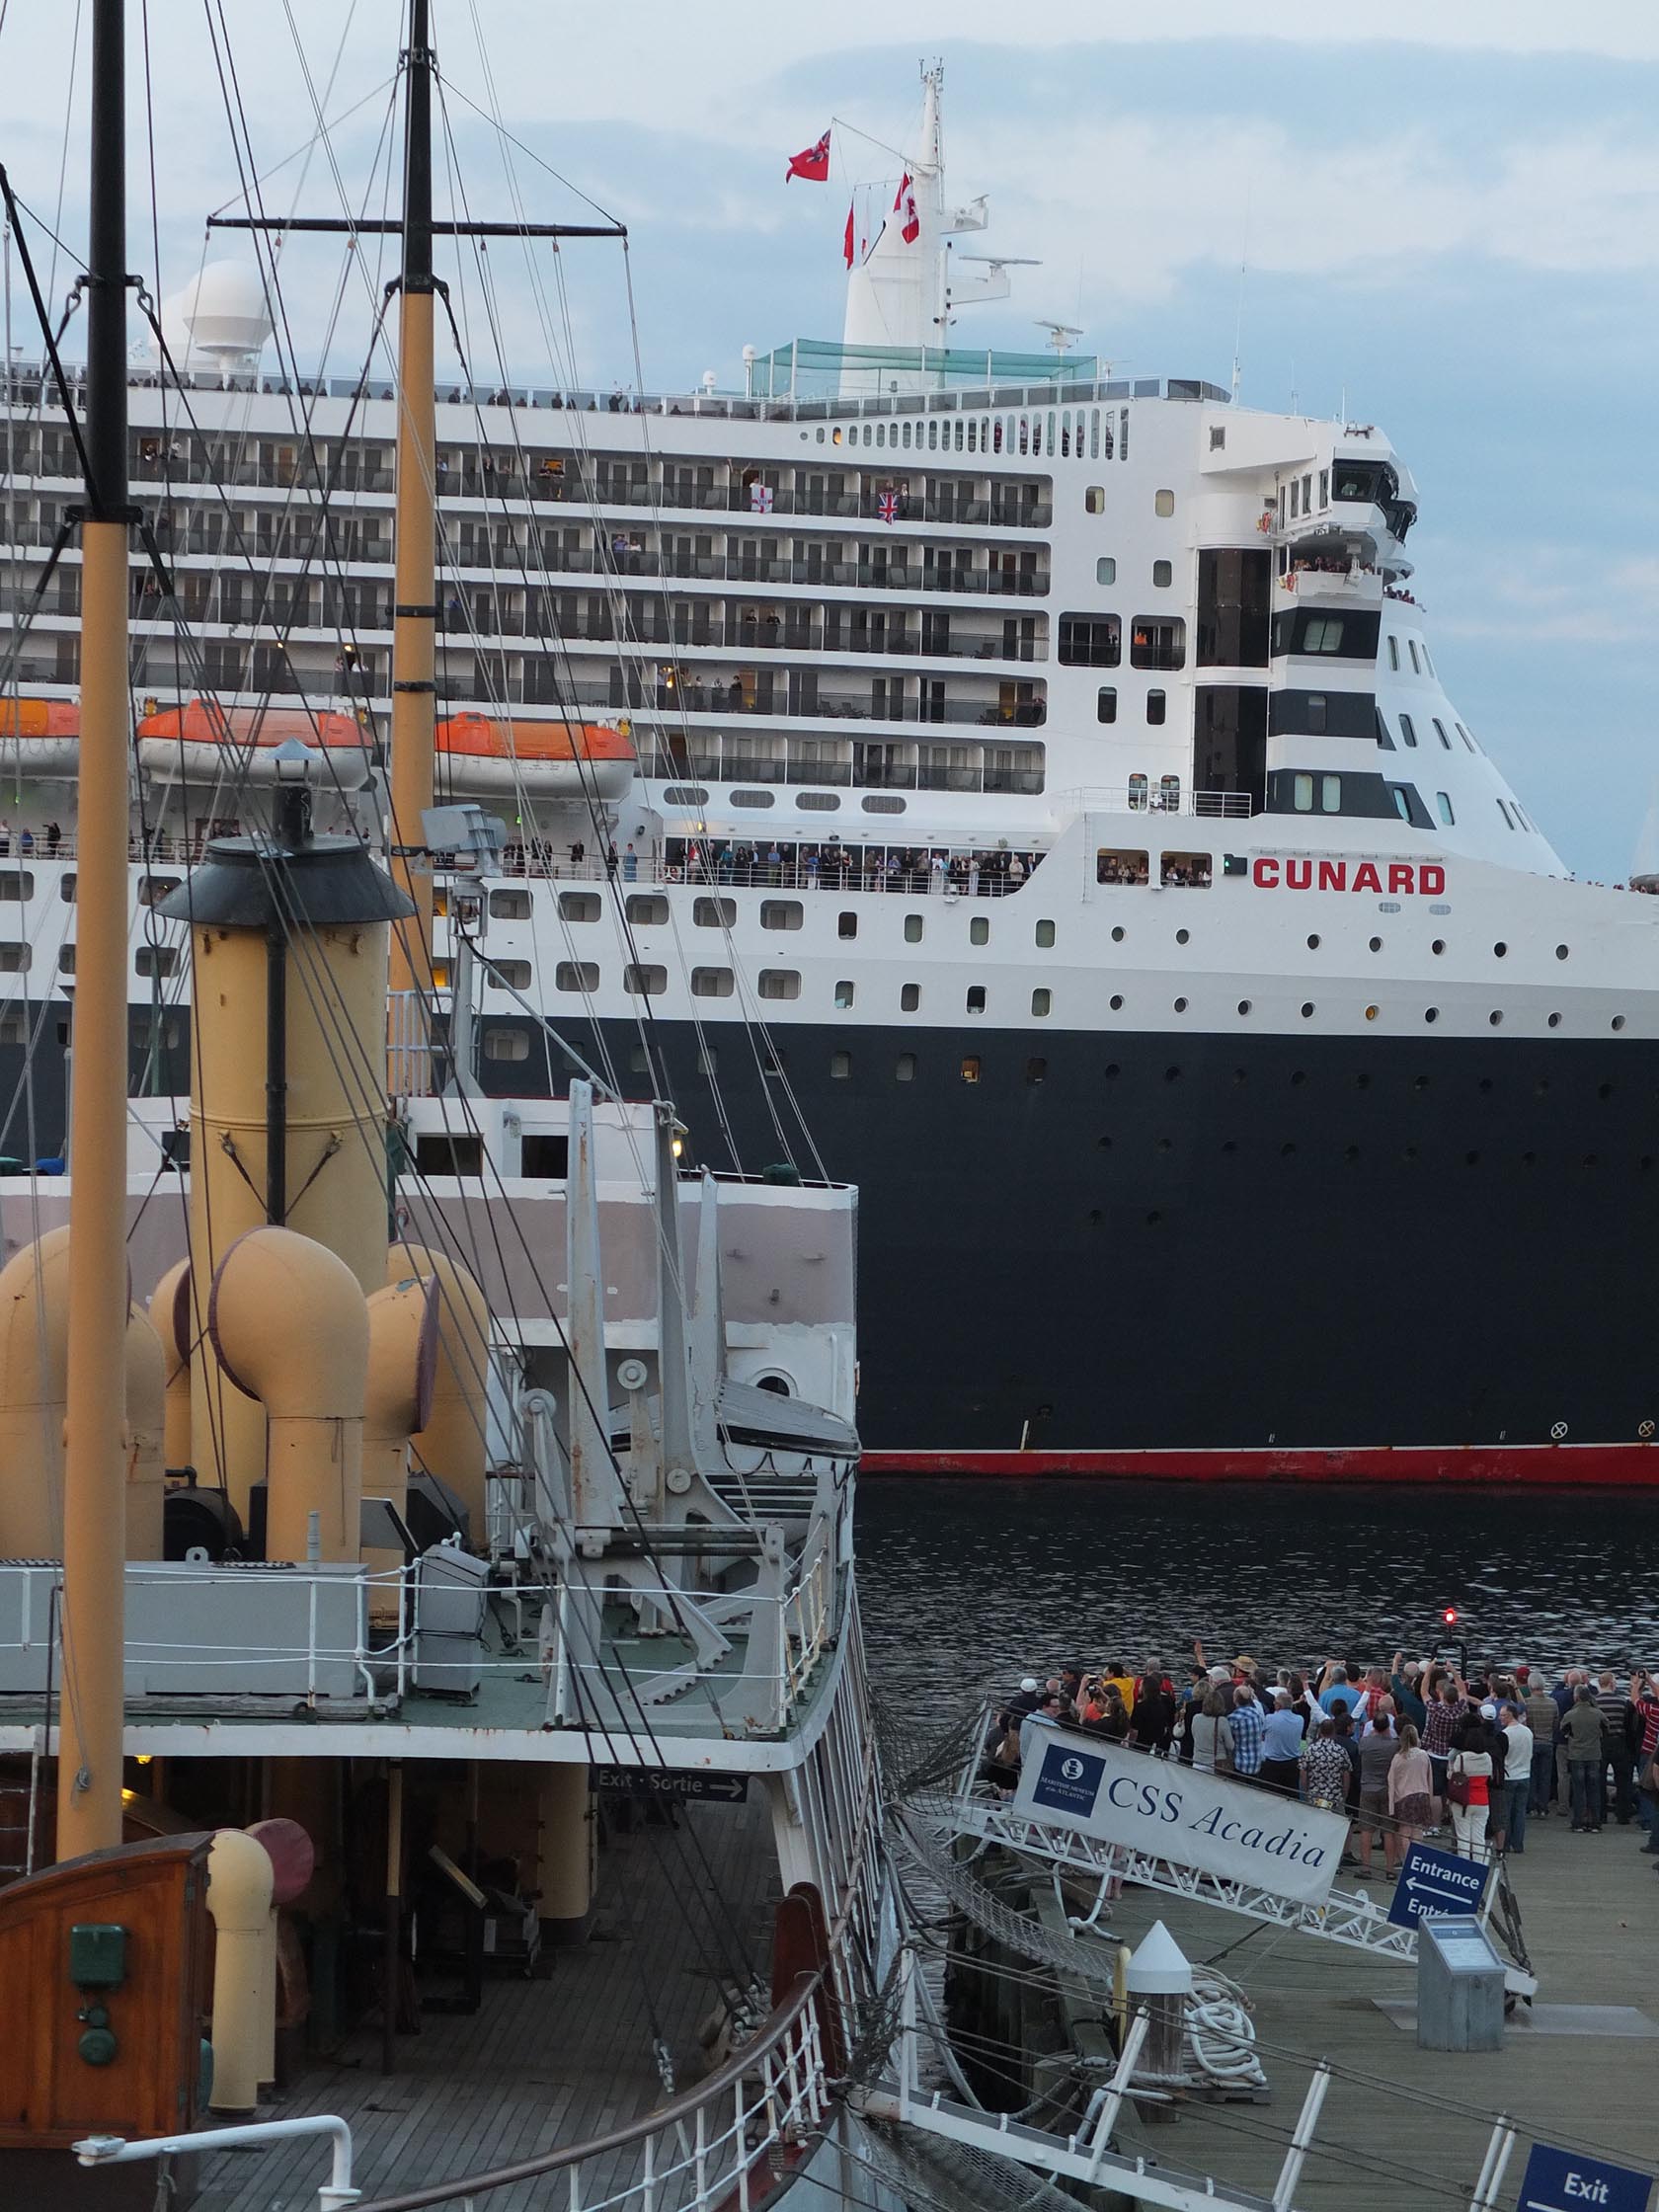 The past meets the present as the Cunard Line's Queen Mary sails past the CSS Acadia